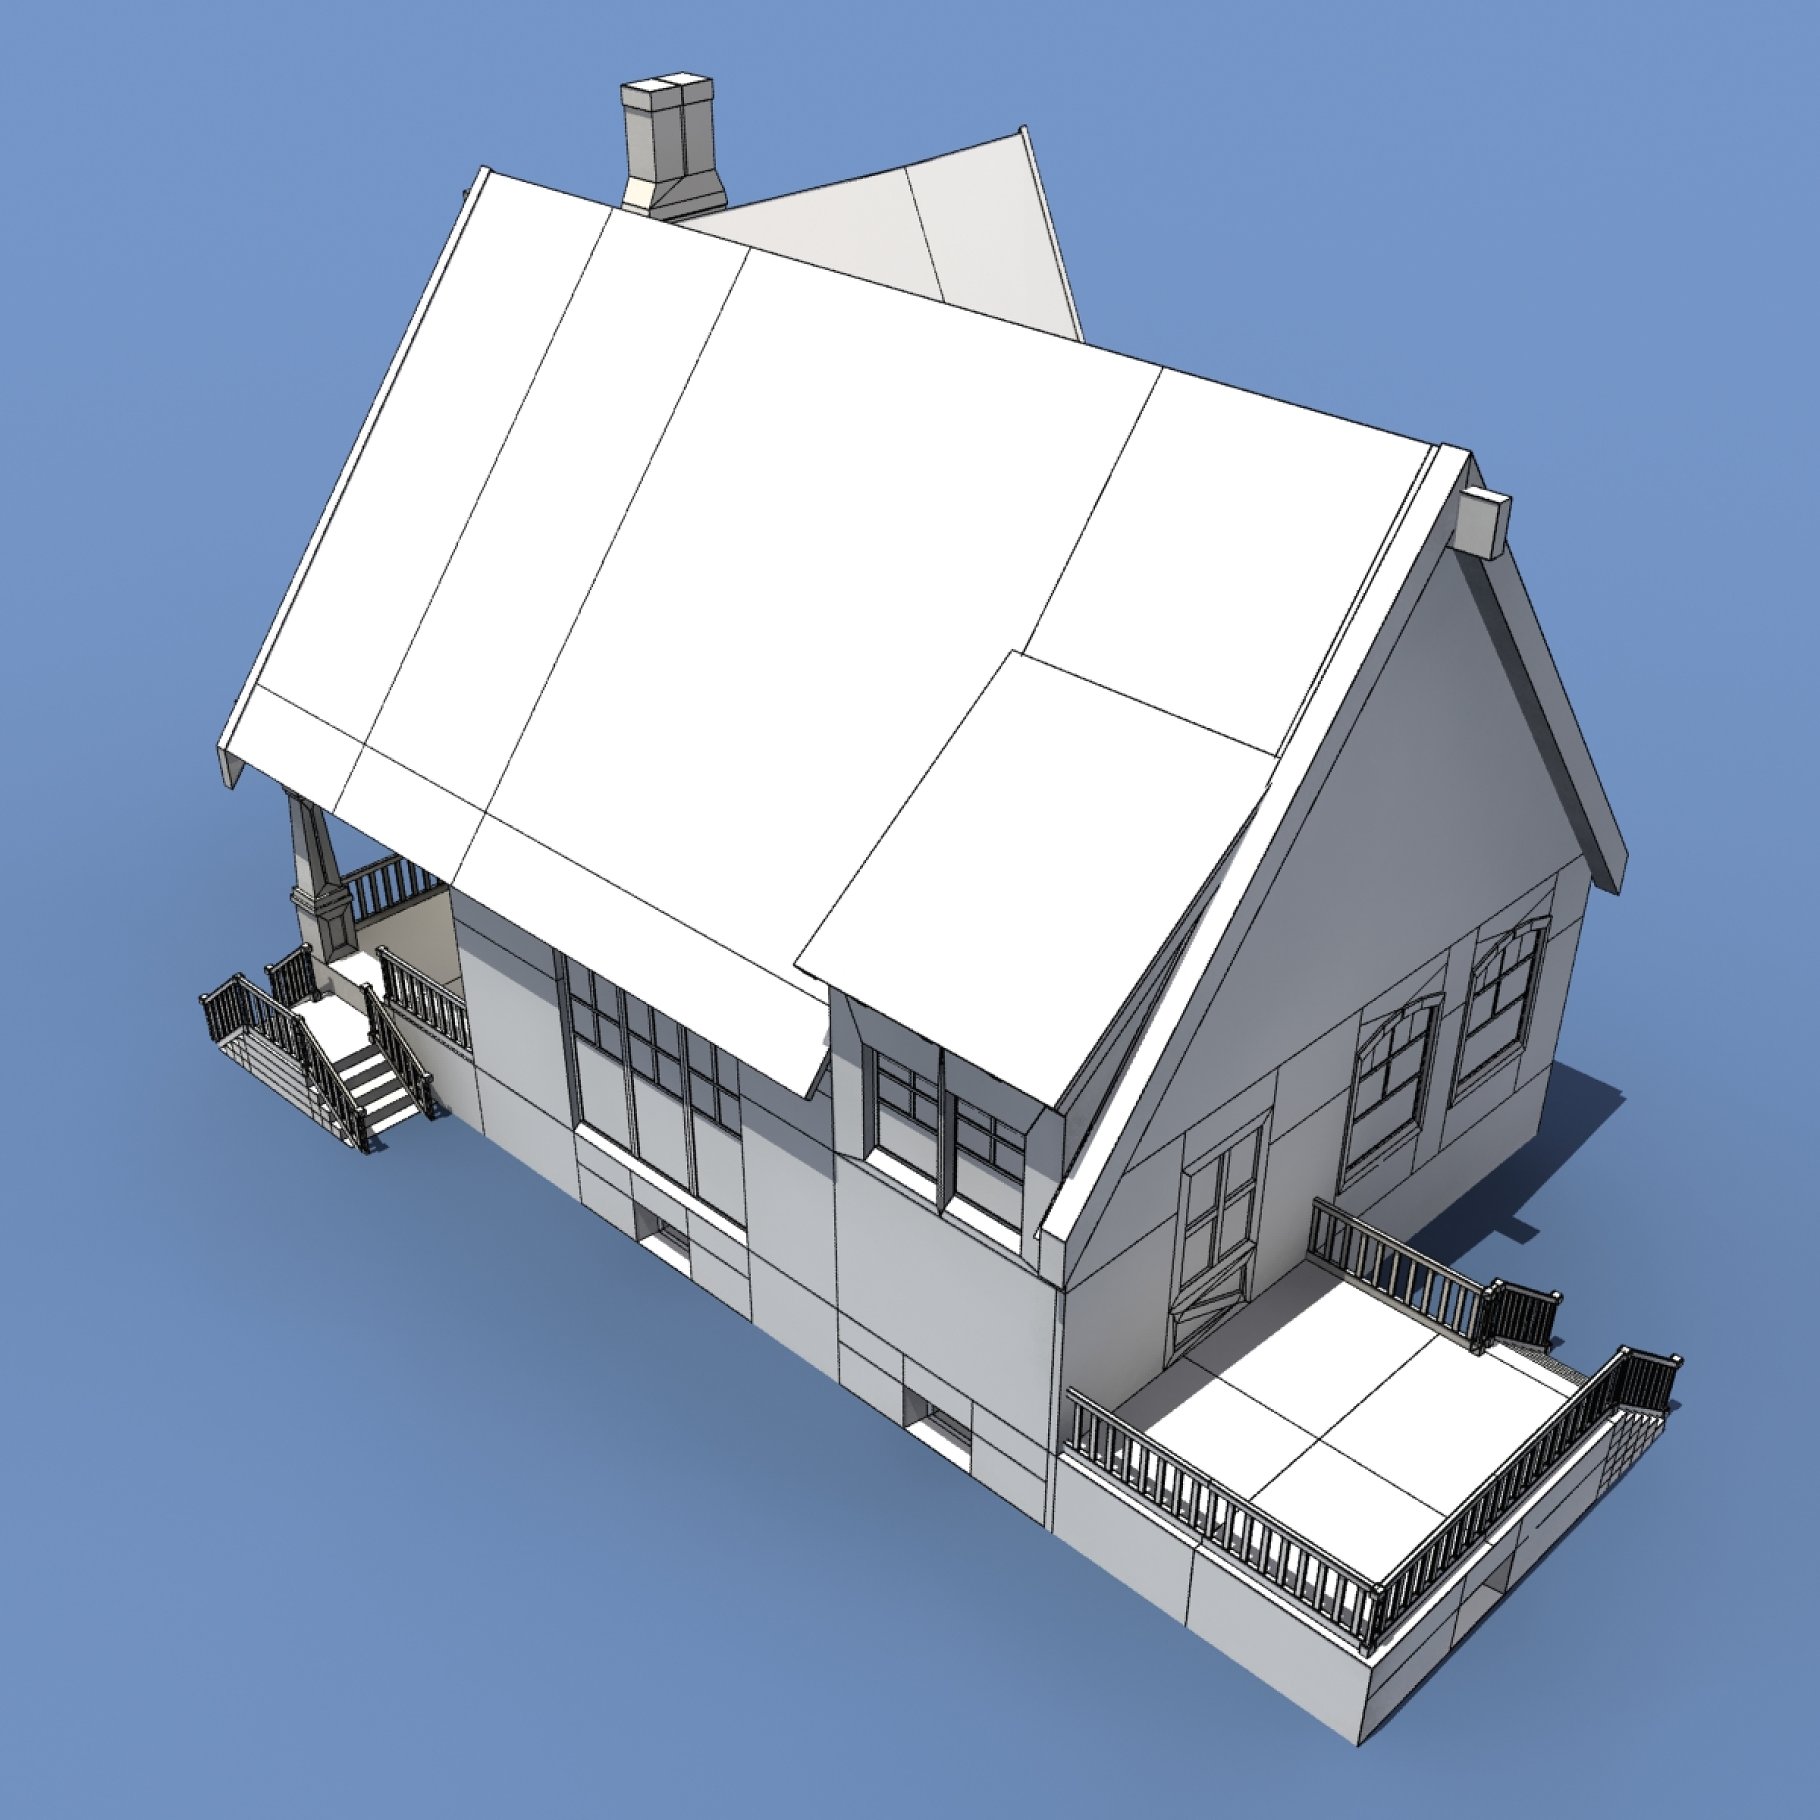 Low poly house back left graphic mockup in white.